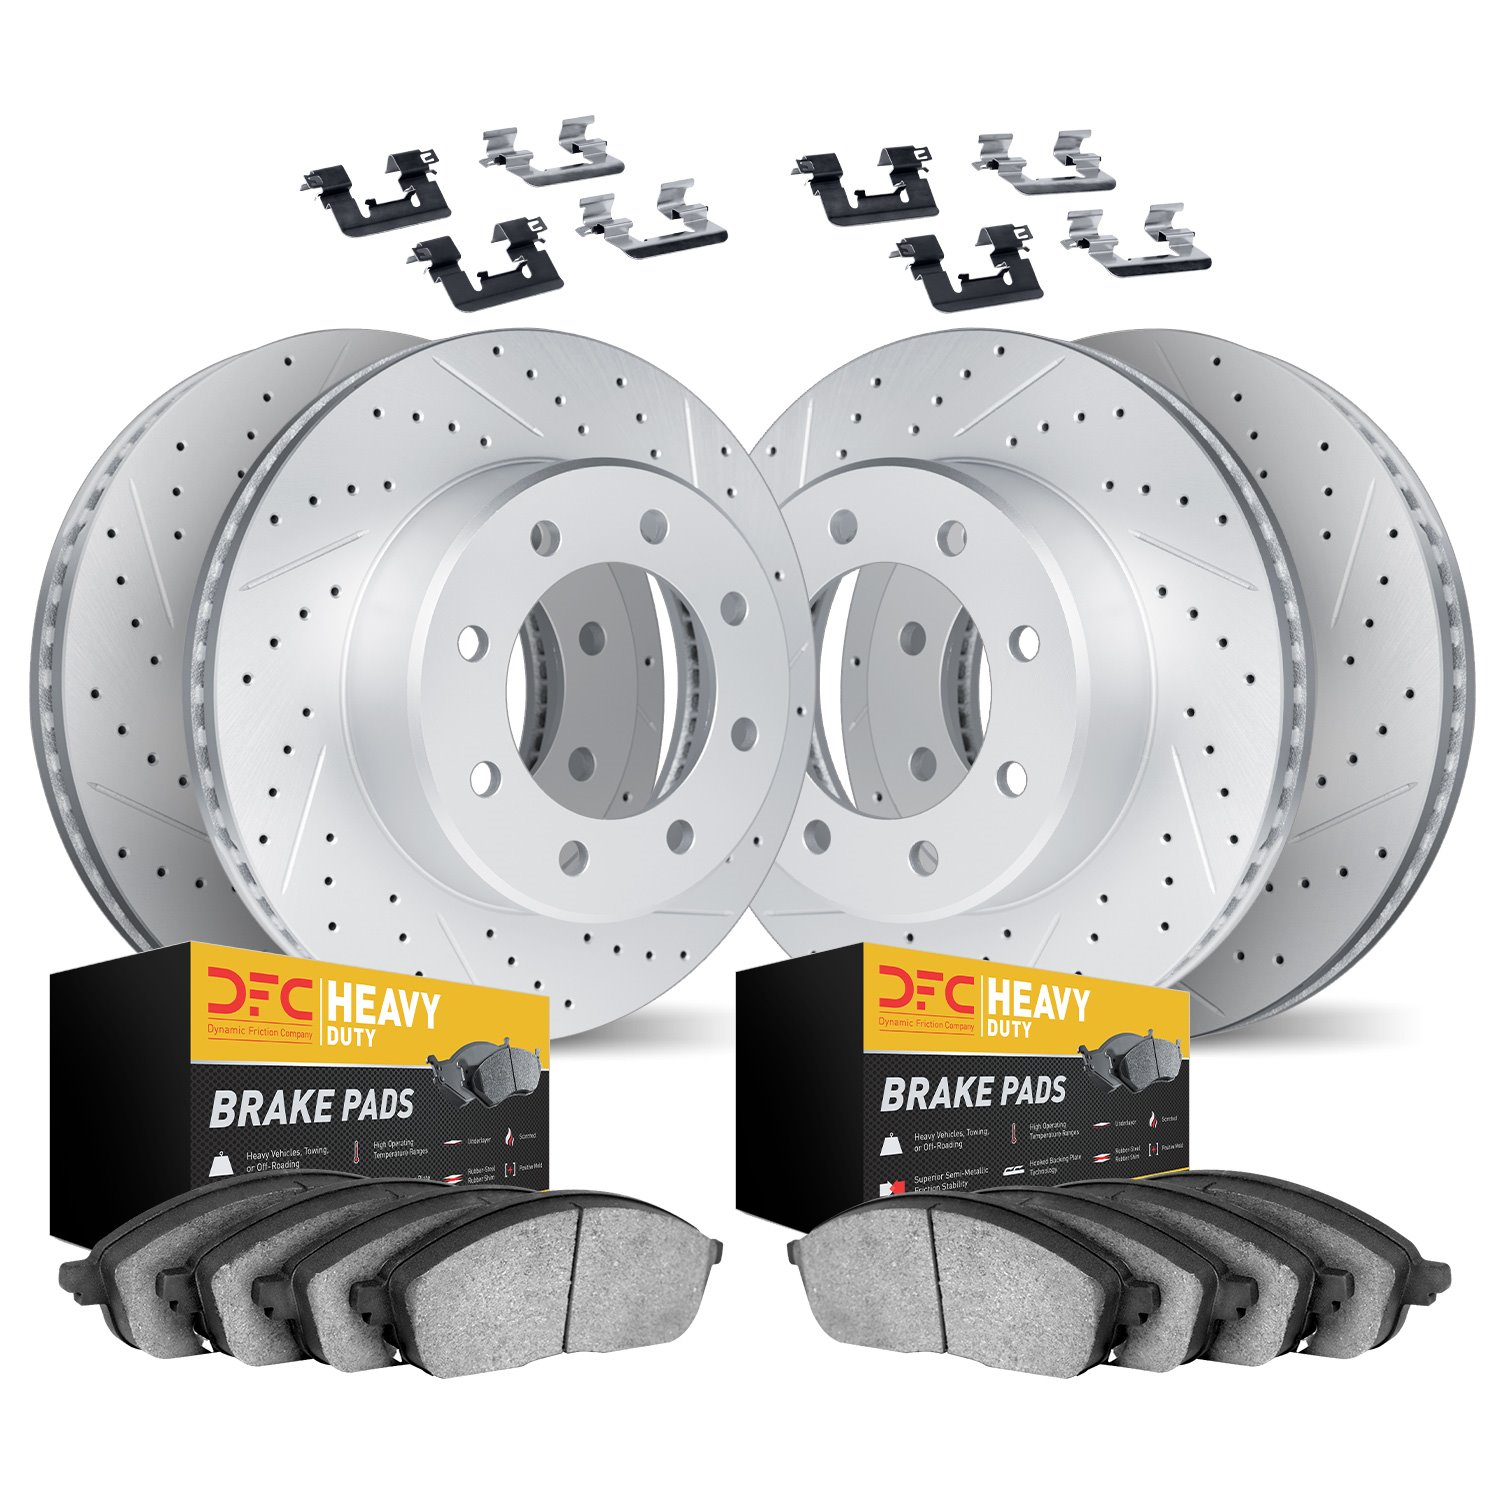 2214-48108 Geoperformance Drilled/Slotted Rotors w/Heavy-Duty Pads Kit & Hardware, 2001-2010 GM, Position: Front and Rear